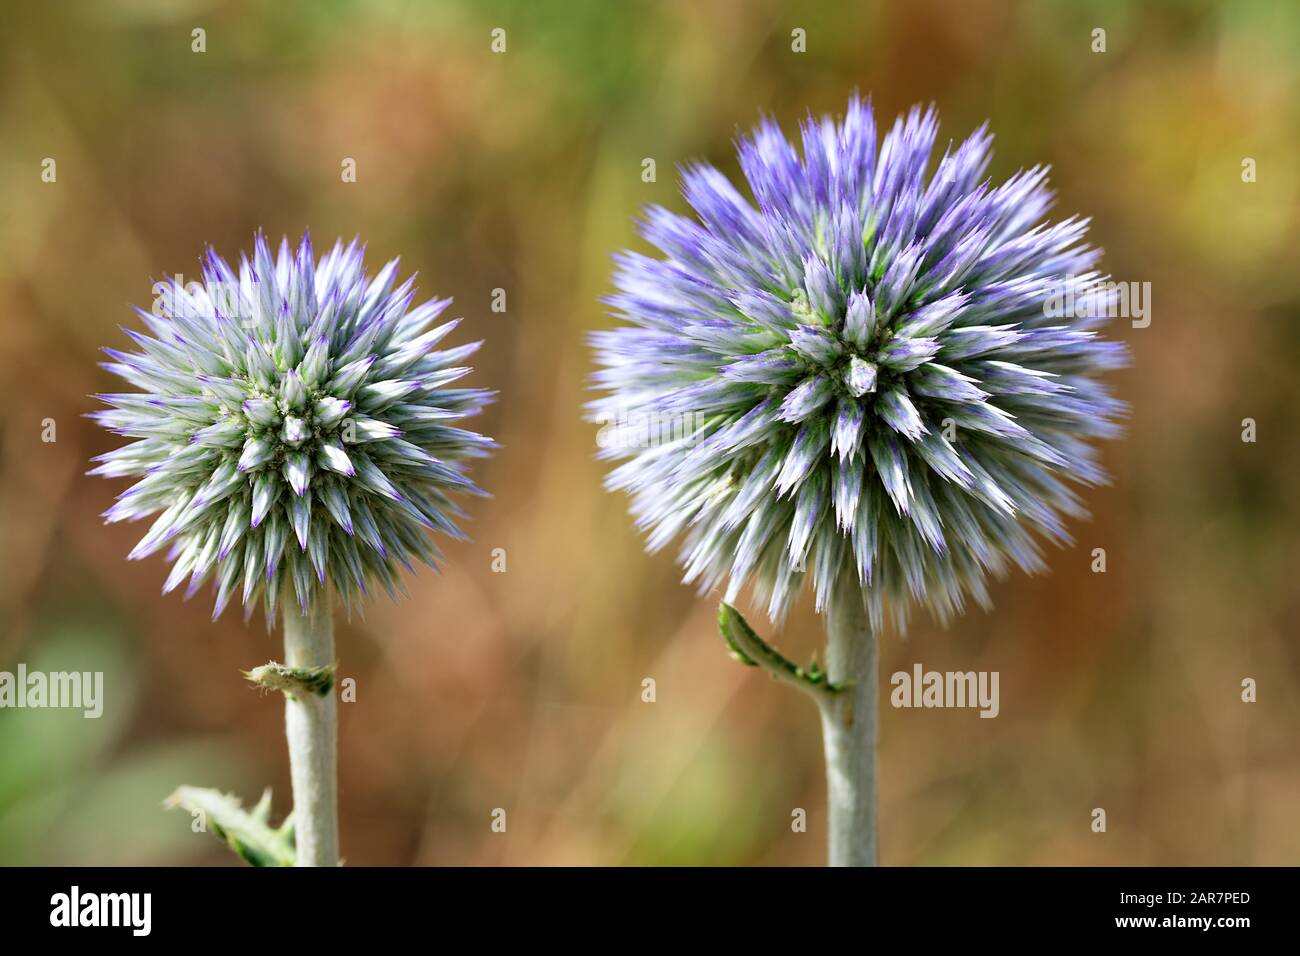 Beautiful and unusual round flowers of a thistle of a spherical shape of lilac color close-up on a blur background. Stock Photo